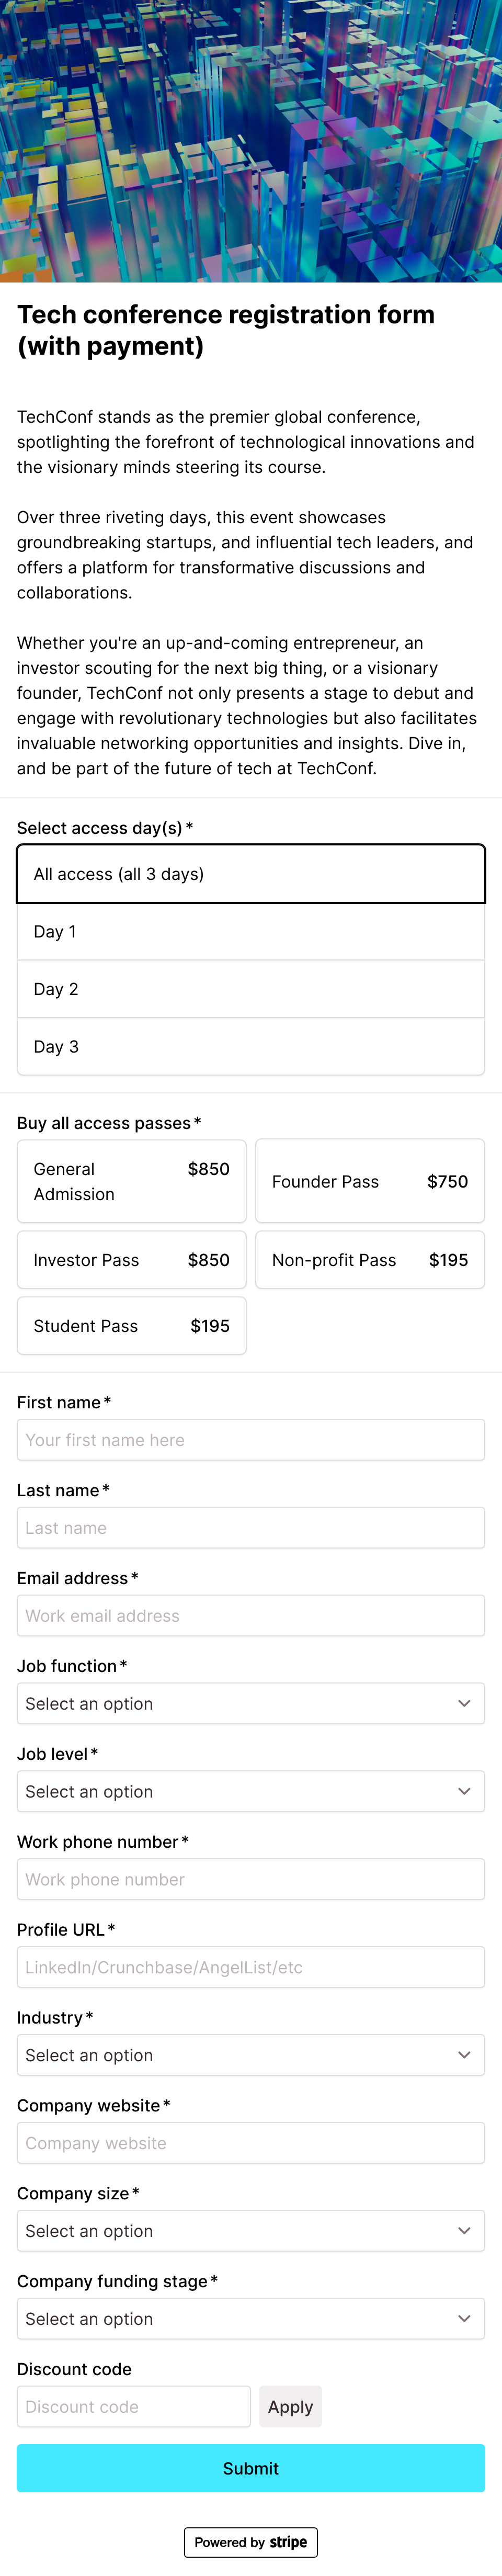 Tech conference registration form (with payment)